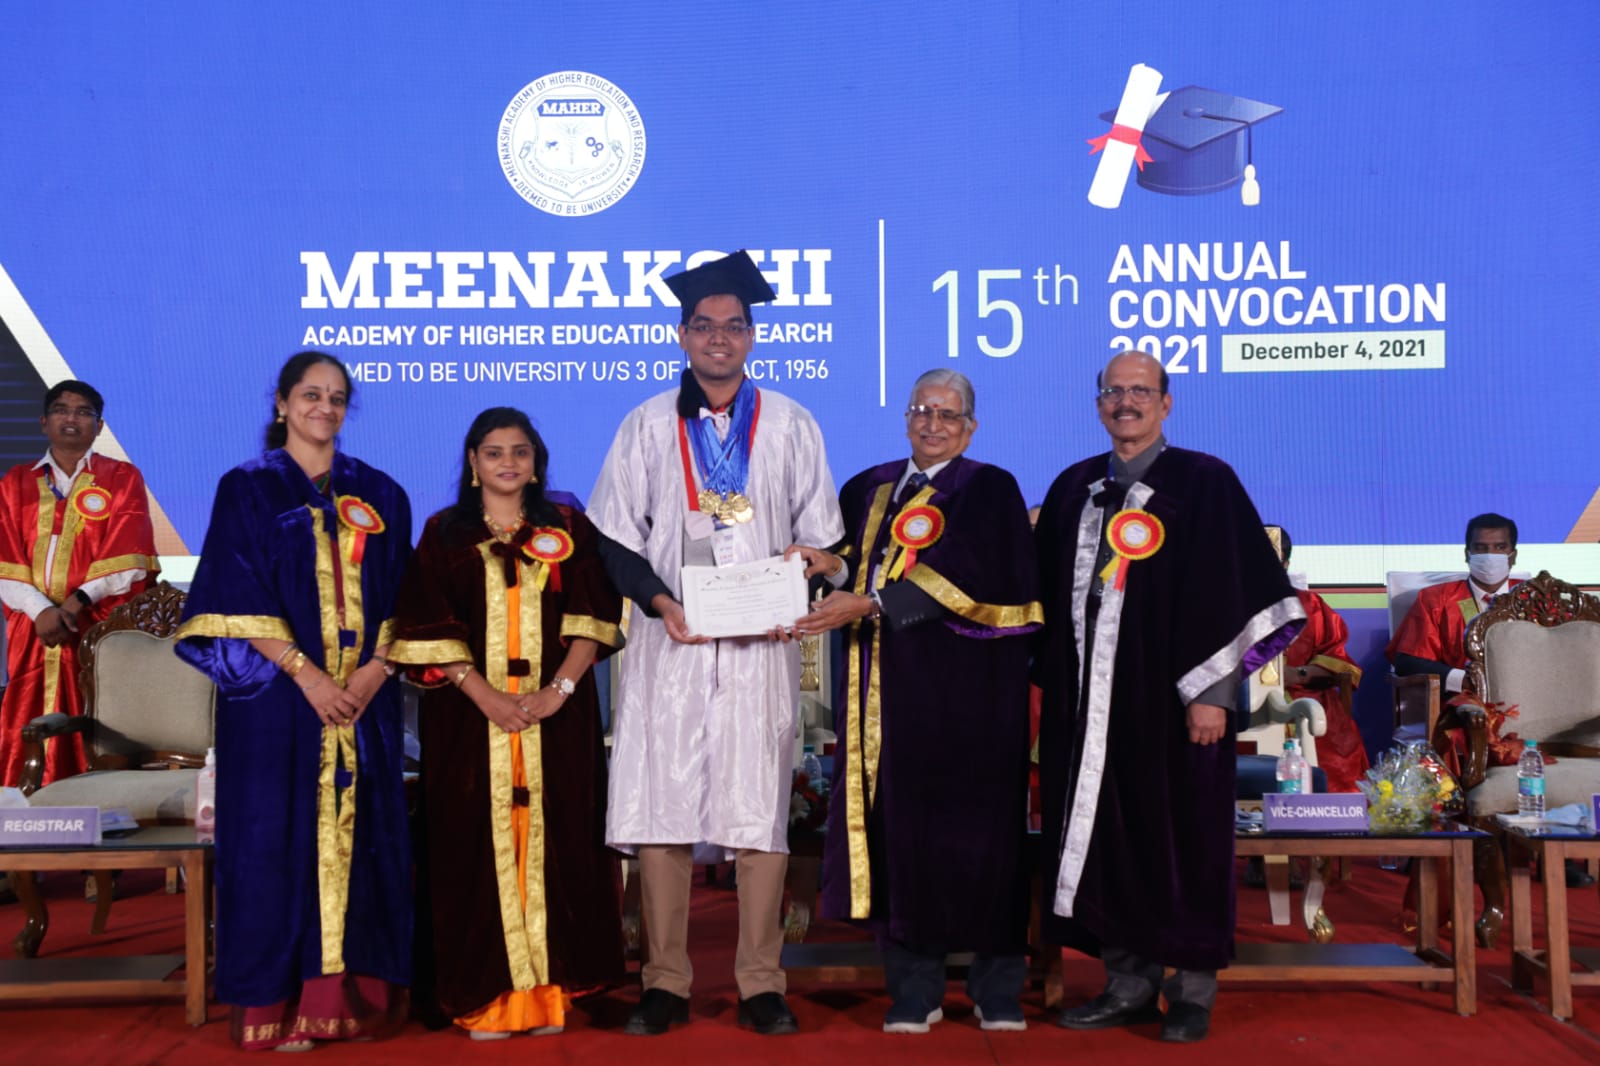 15th annual convocation of Meenakshi Academy of education